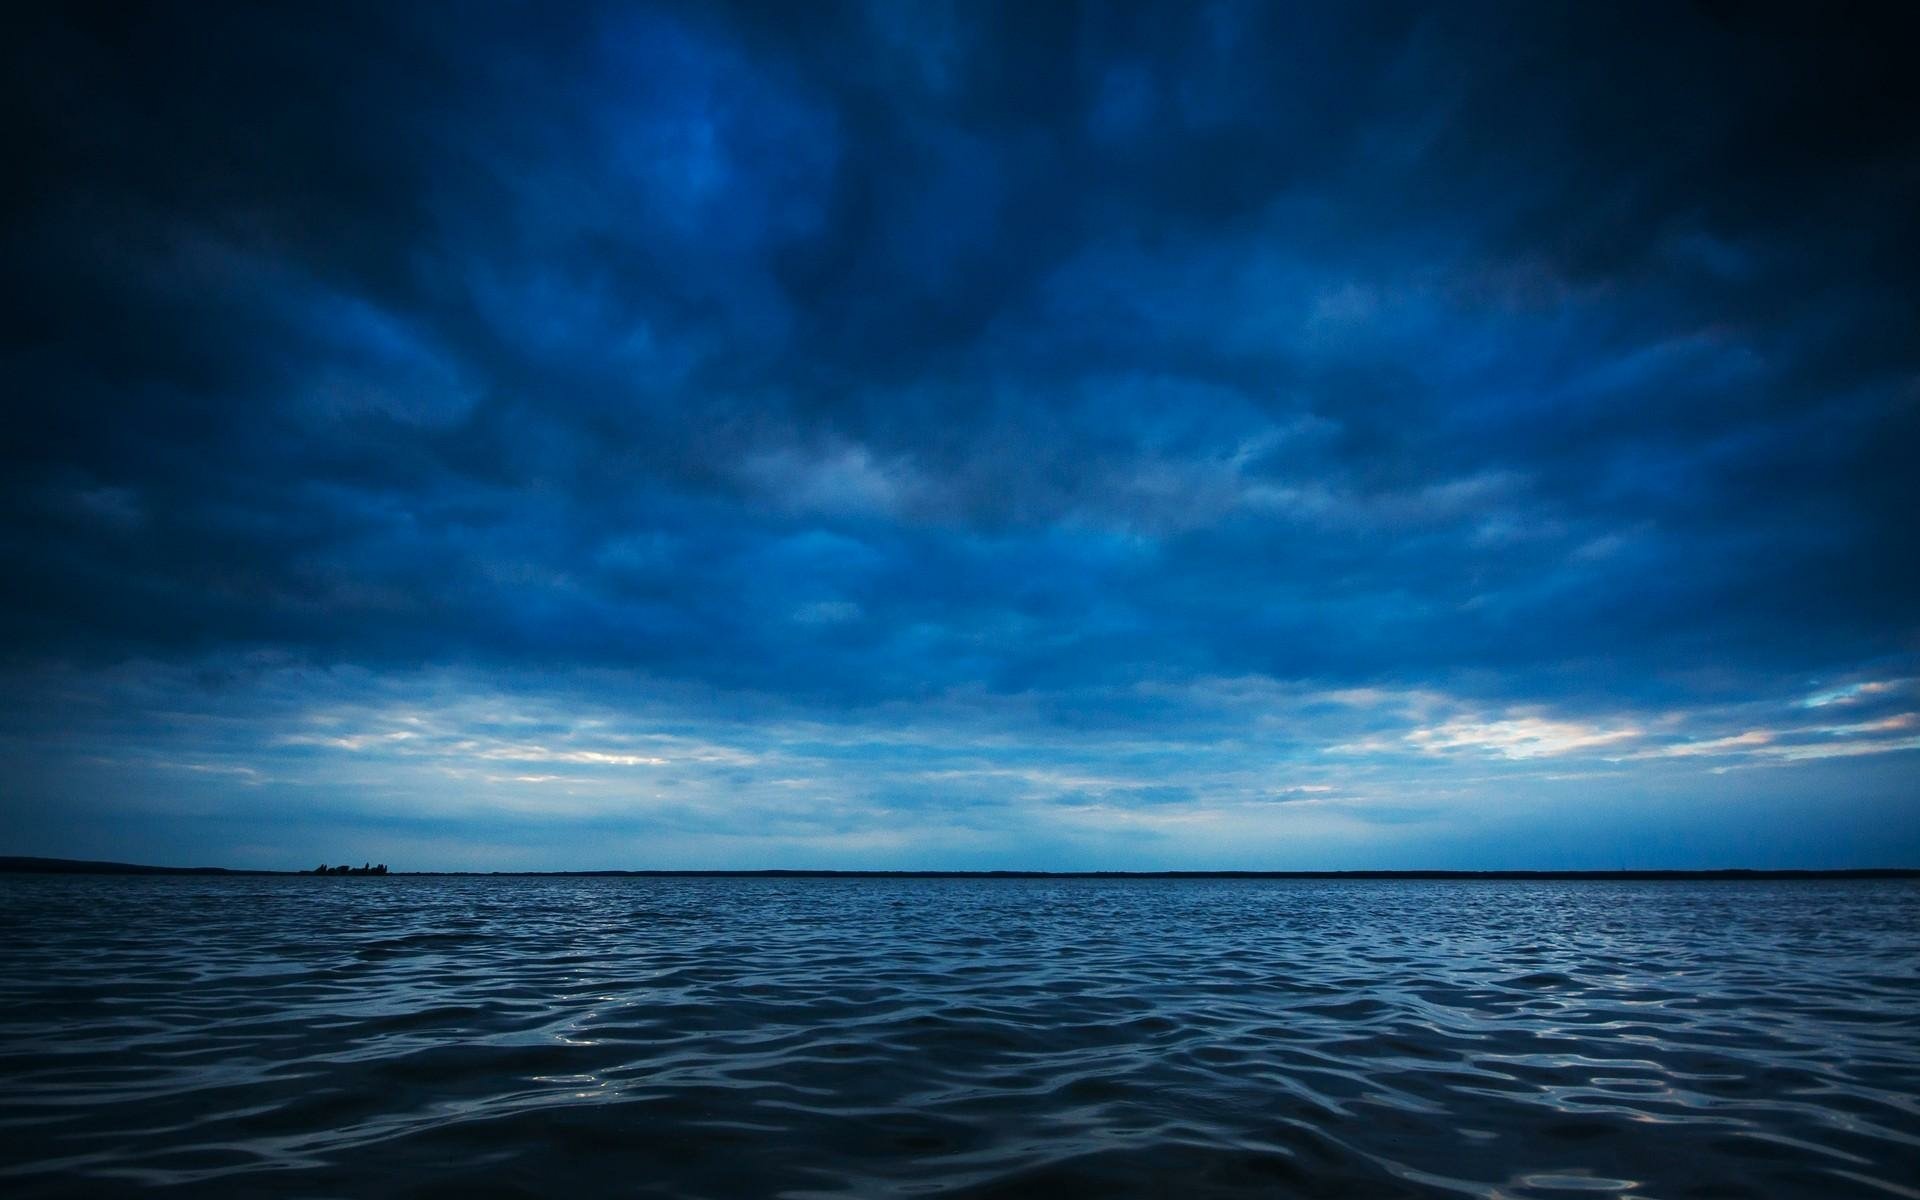 Blue Clouds Over Dark Blue Sea Hd Wallpaper Background Image 1920x1200 Id 778285 Wallpaper Abyss